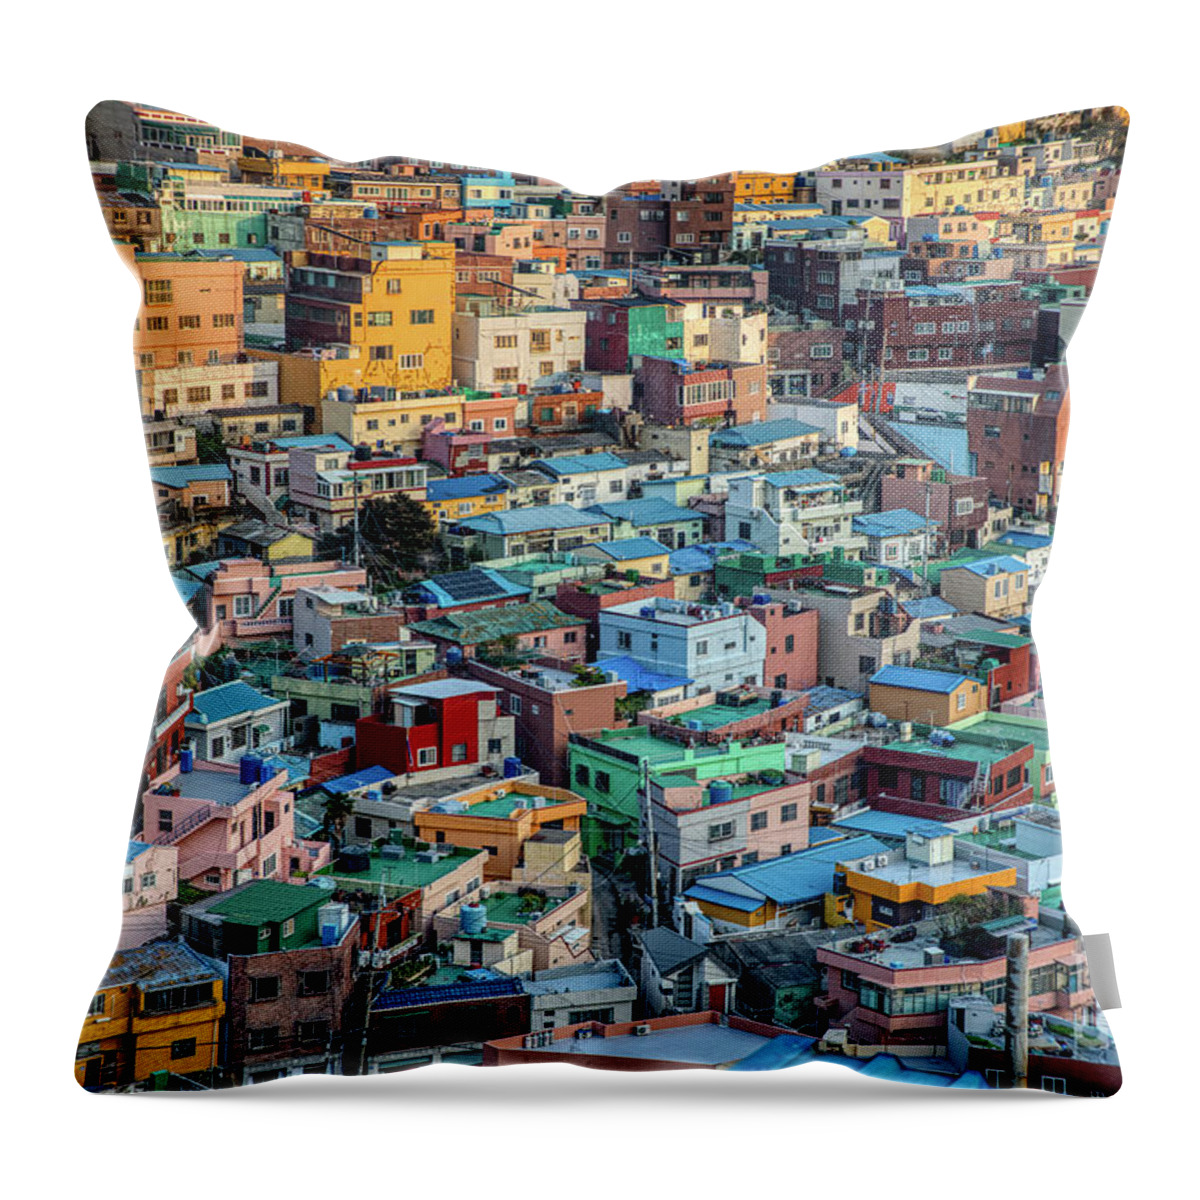 South Korea Throw Pillow featuring the photograph Gamcheon Culture Village by Rebecca Caroline Photography